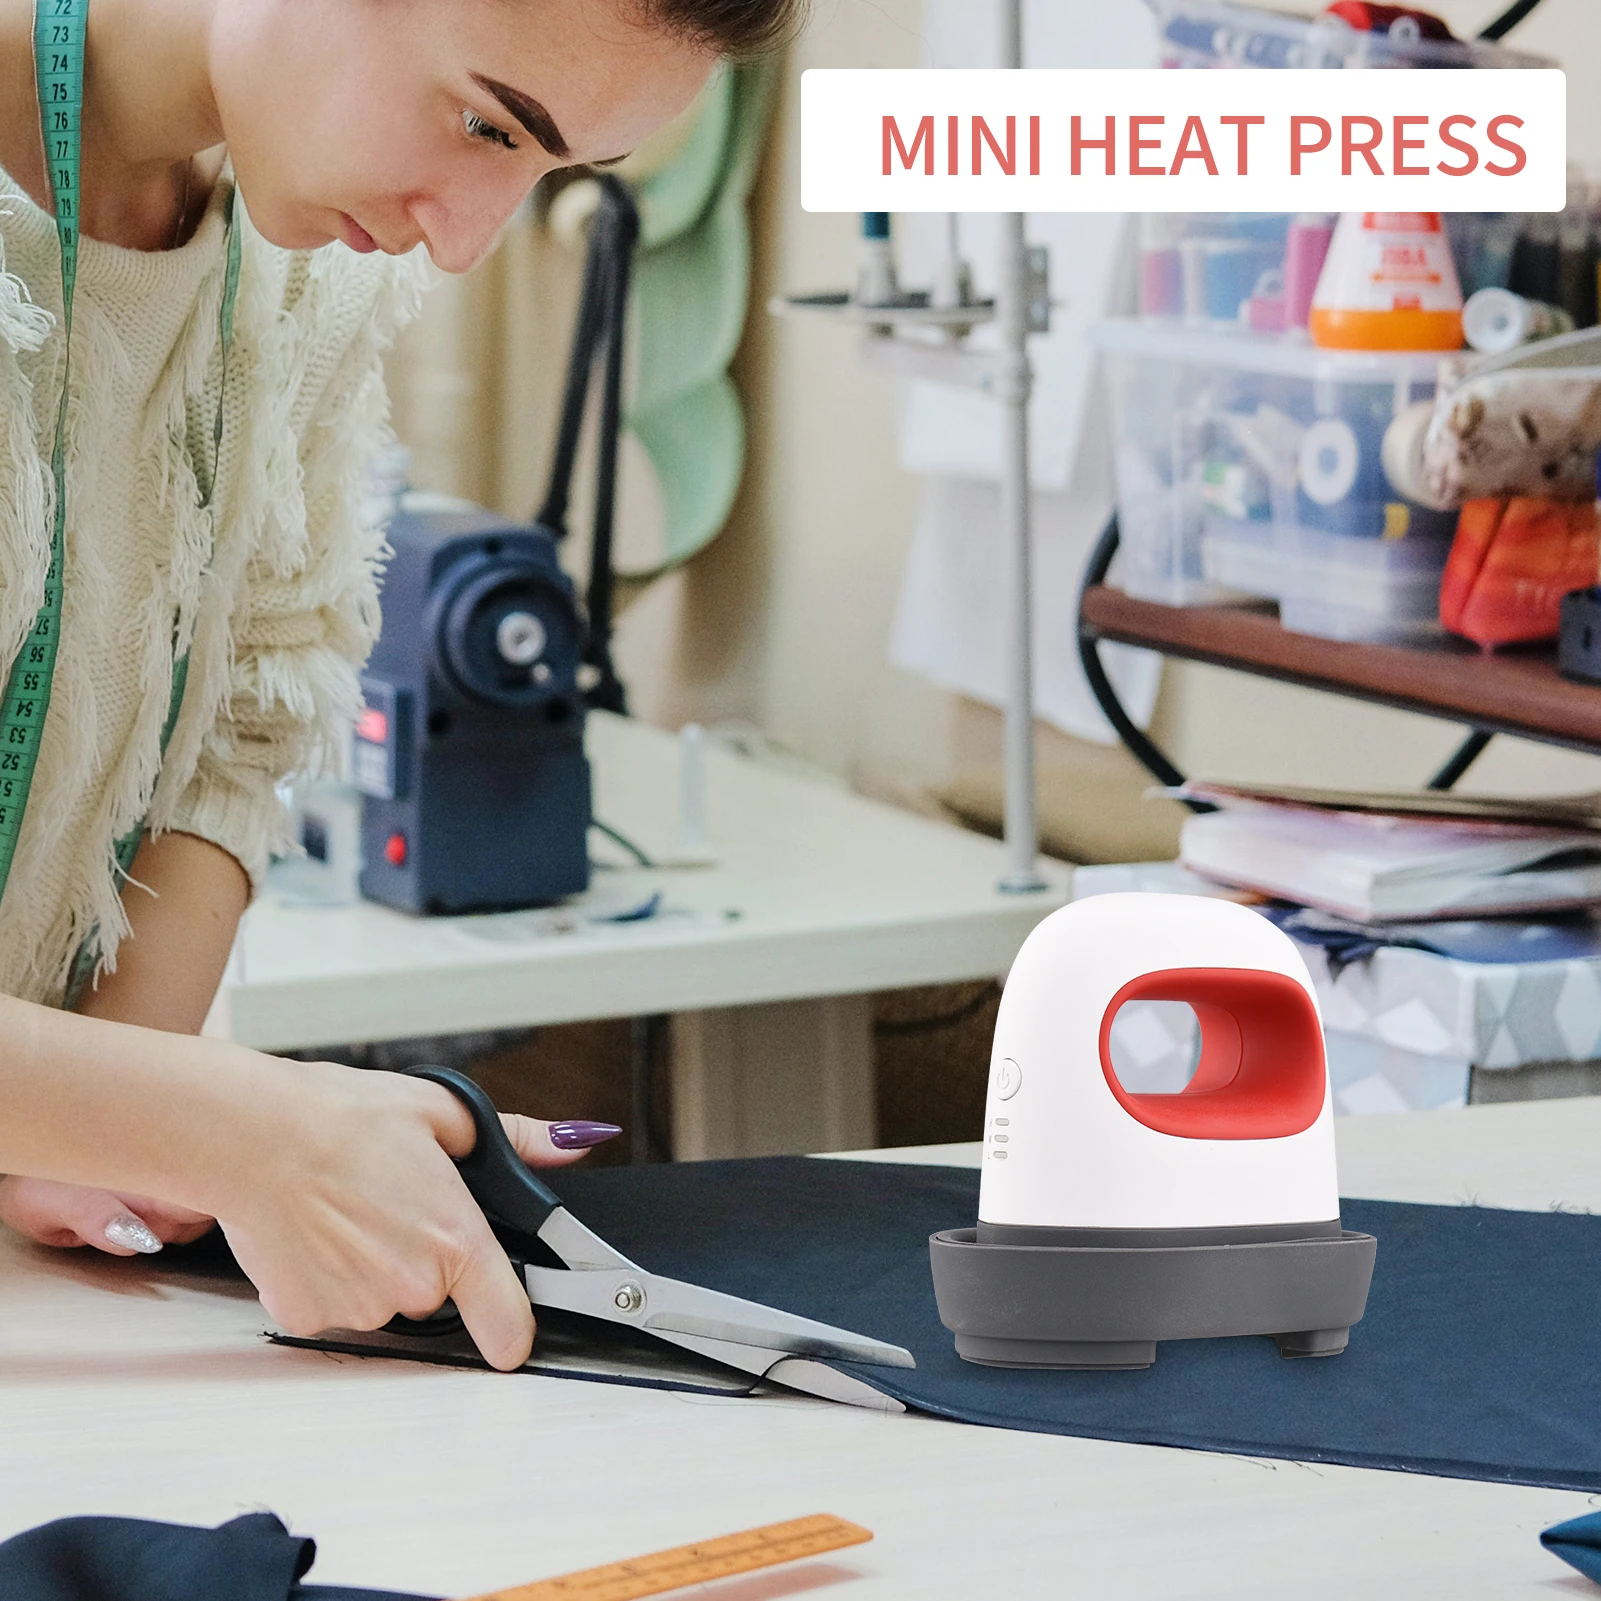 Portable Heat Press Machine T-Shirt Printing Easy Heating Transfer Press  Iron Machines for Clothes Bags Hats Pads Blanket #R20 - AliExpress